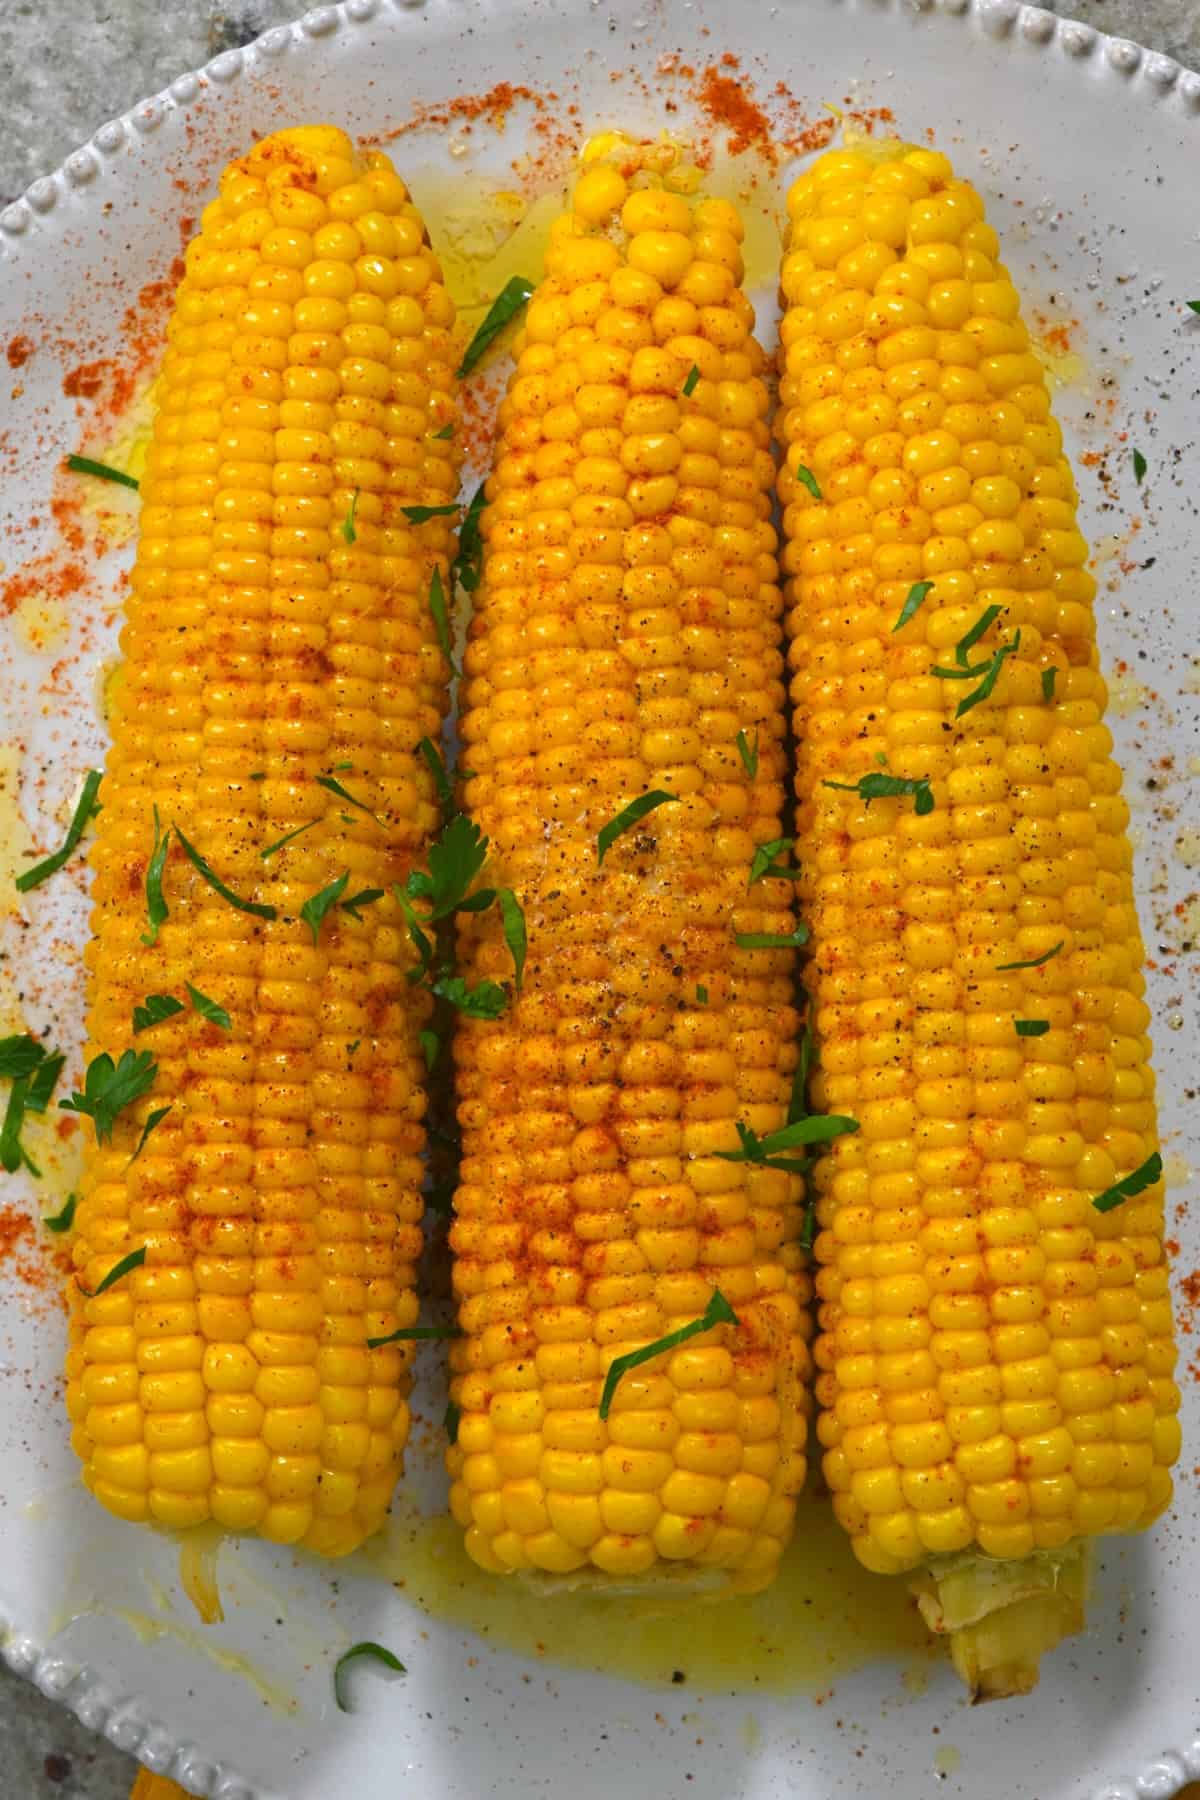 Three boiled corn on the cob topped with butter and pepper